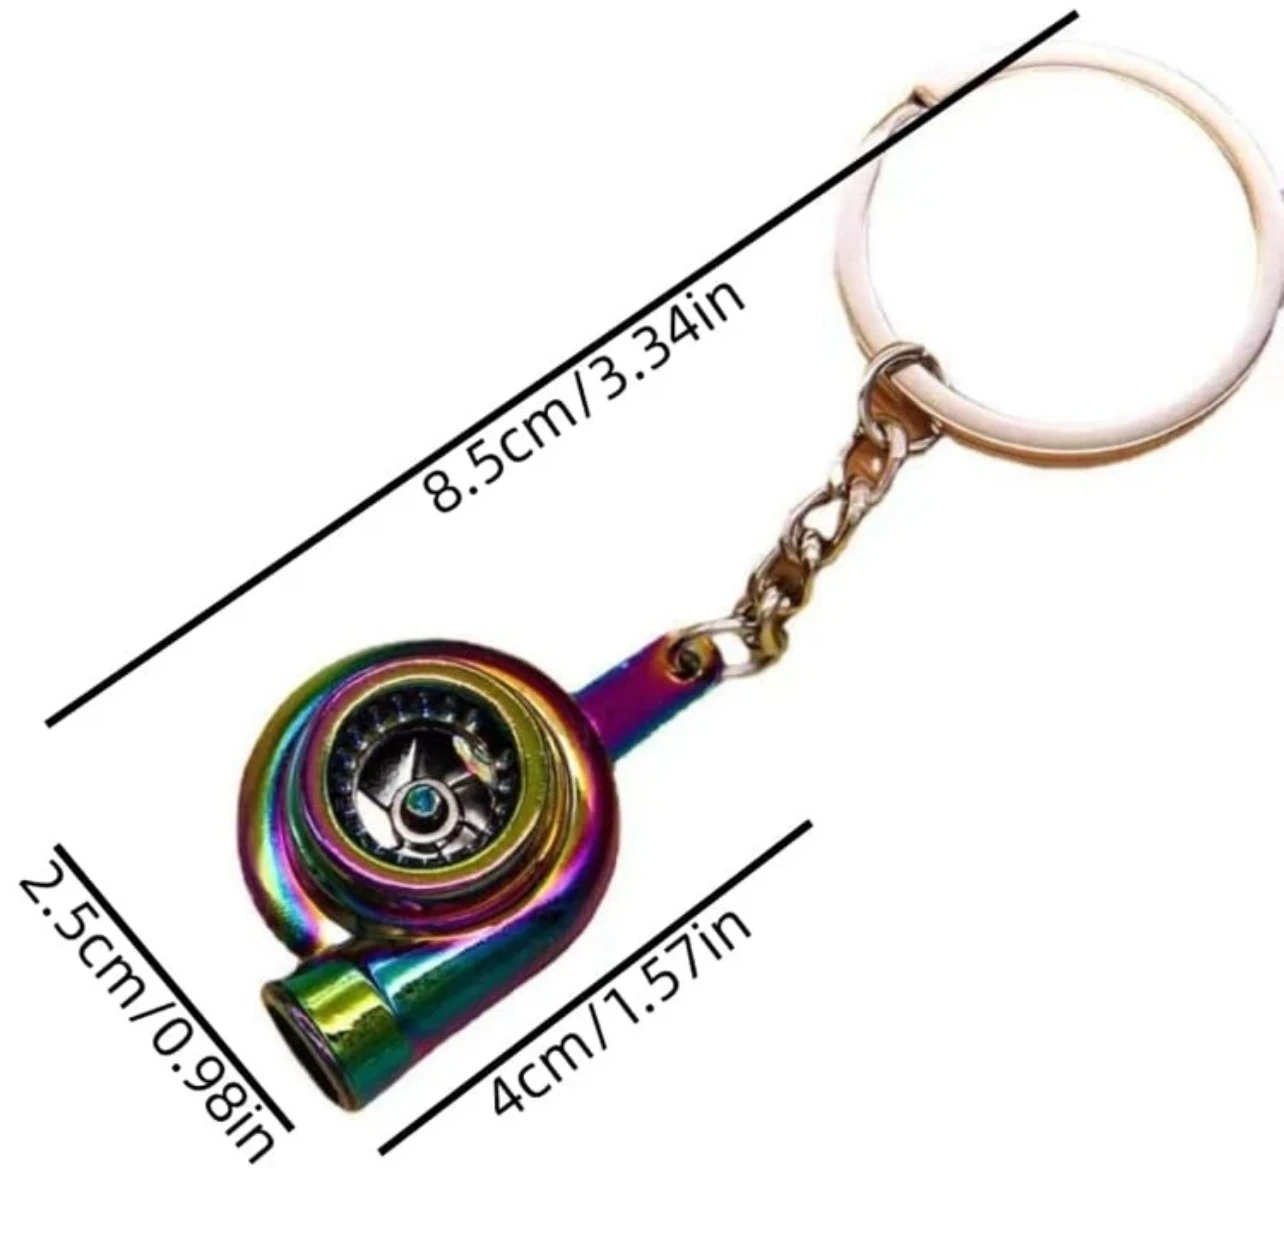 Fashion Men's Metal Keychain Turbo and Gearshift Shaped Pendant for Bags Car Accessories Father's Day Boyfriend Gifts Key Chain